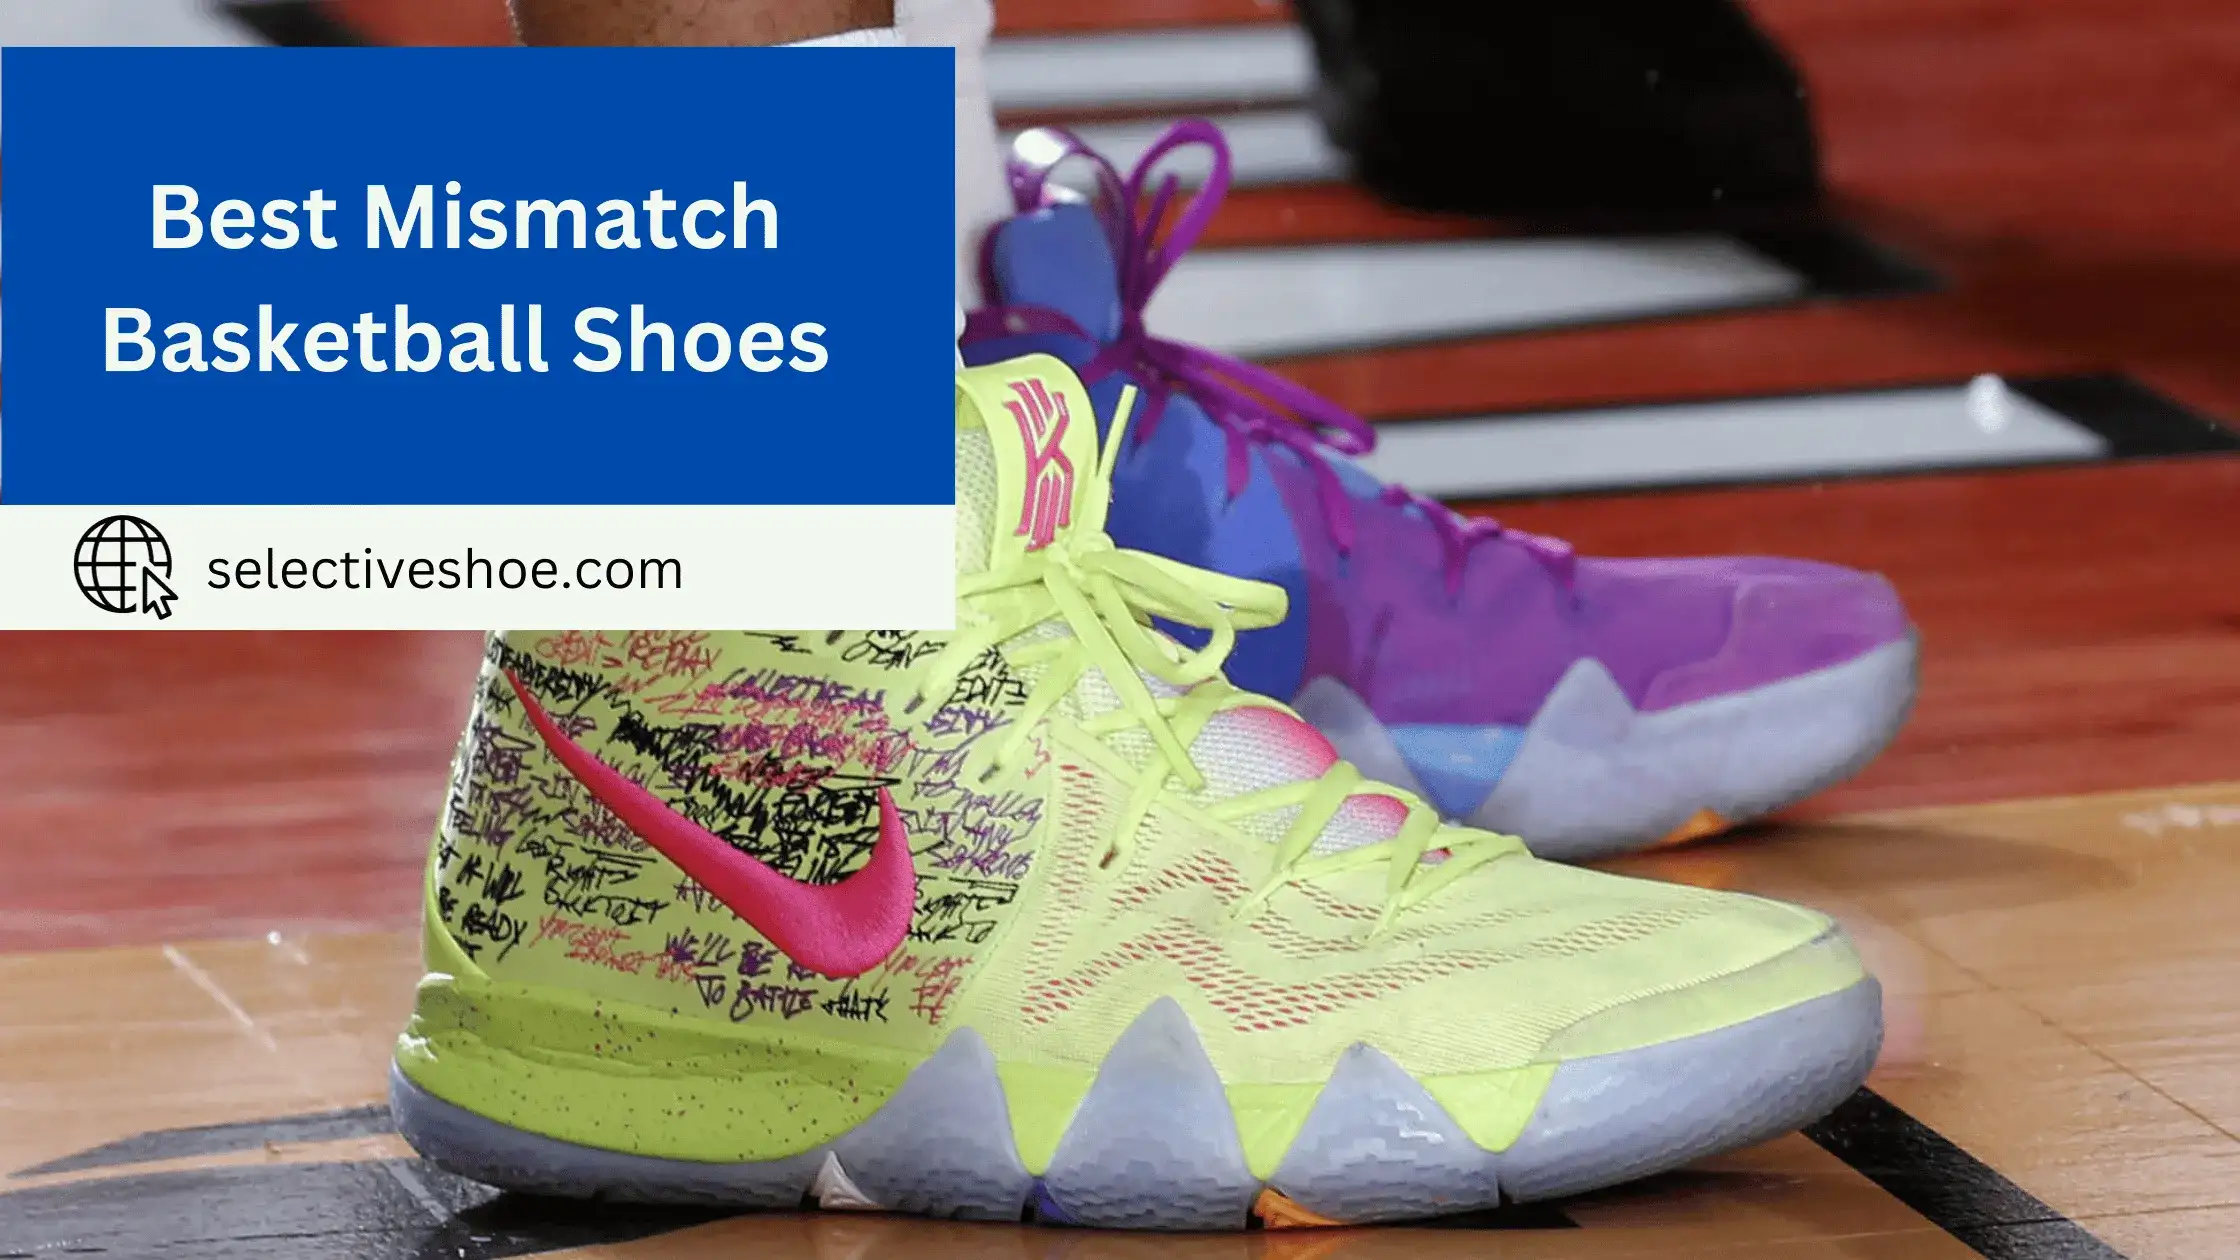 Best Mismatch Basketball Shoes - A Complete Guide